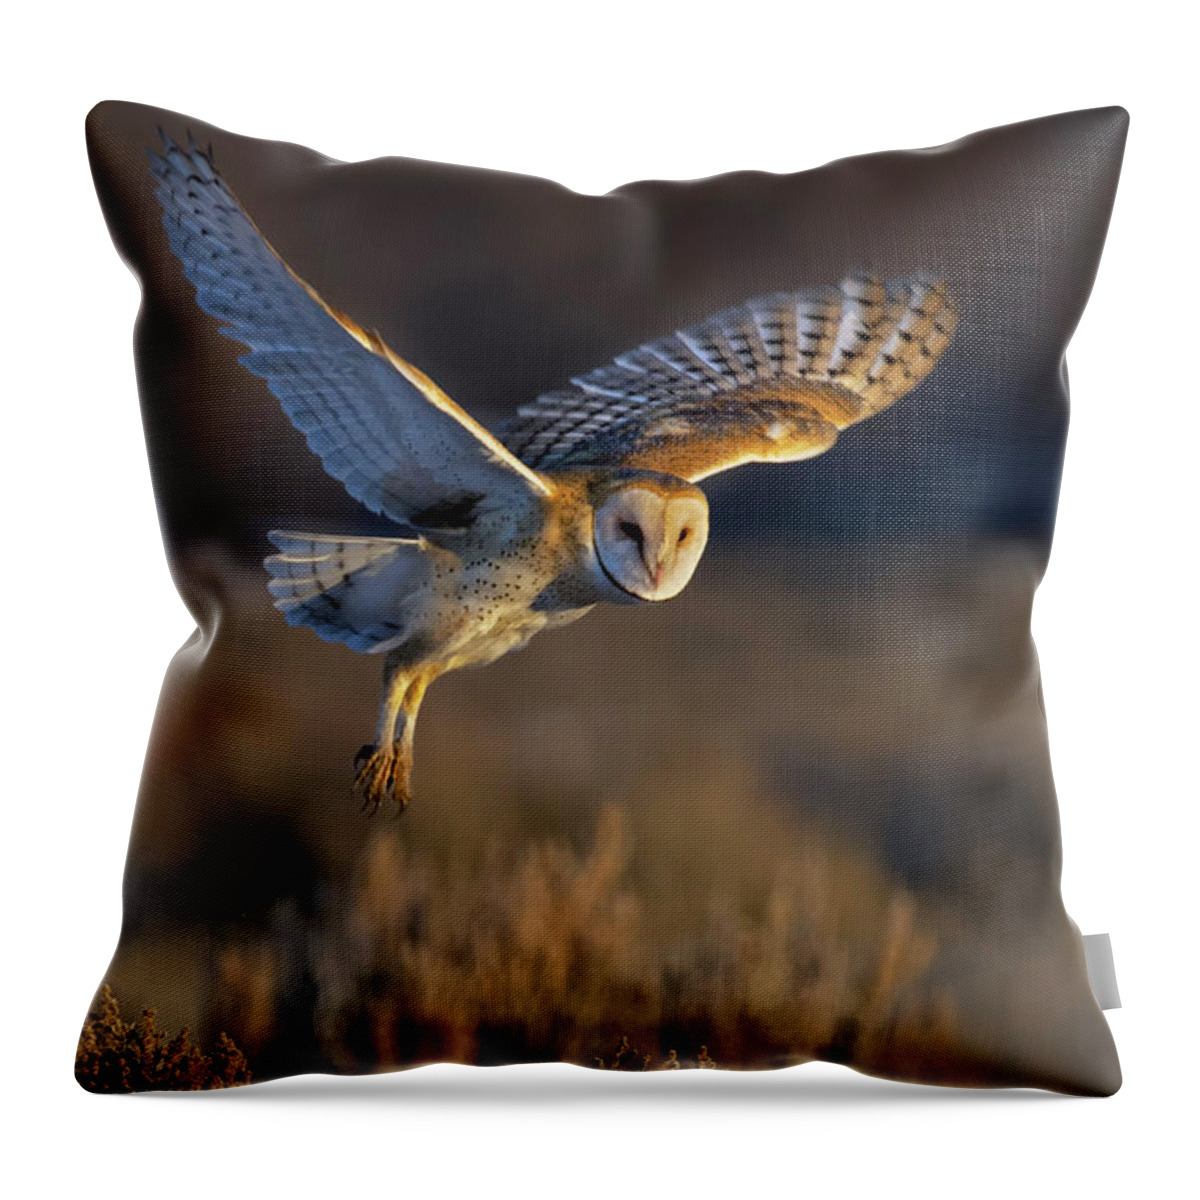 Barn Owl Throw Pillow featuring the photograph Barn Owl Take Off by Rick Mosher